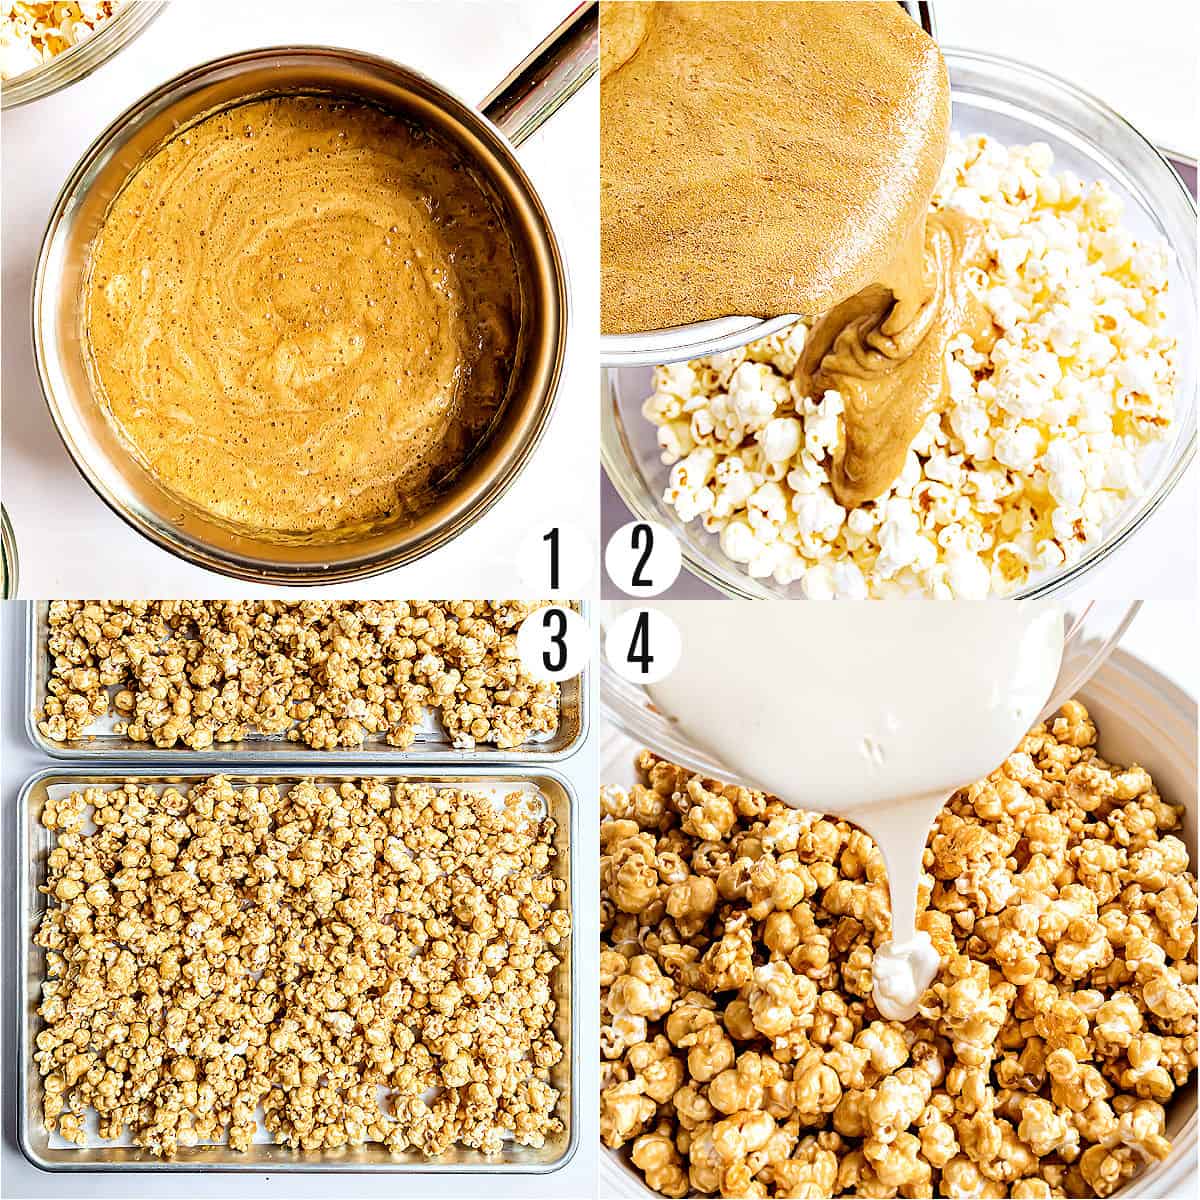 Step by step photos showing how to make caramel corn.